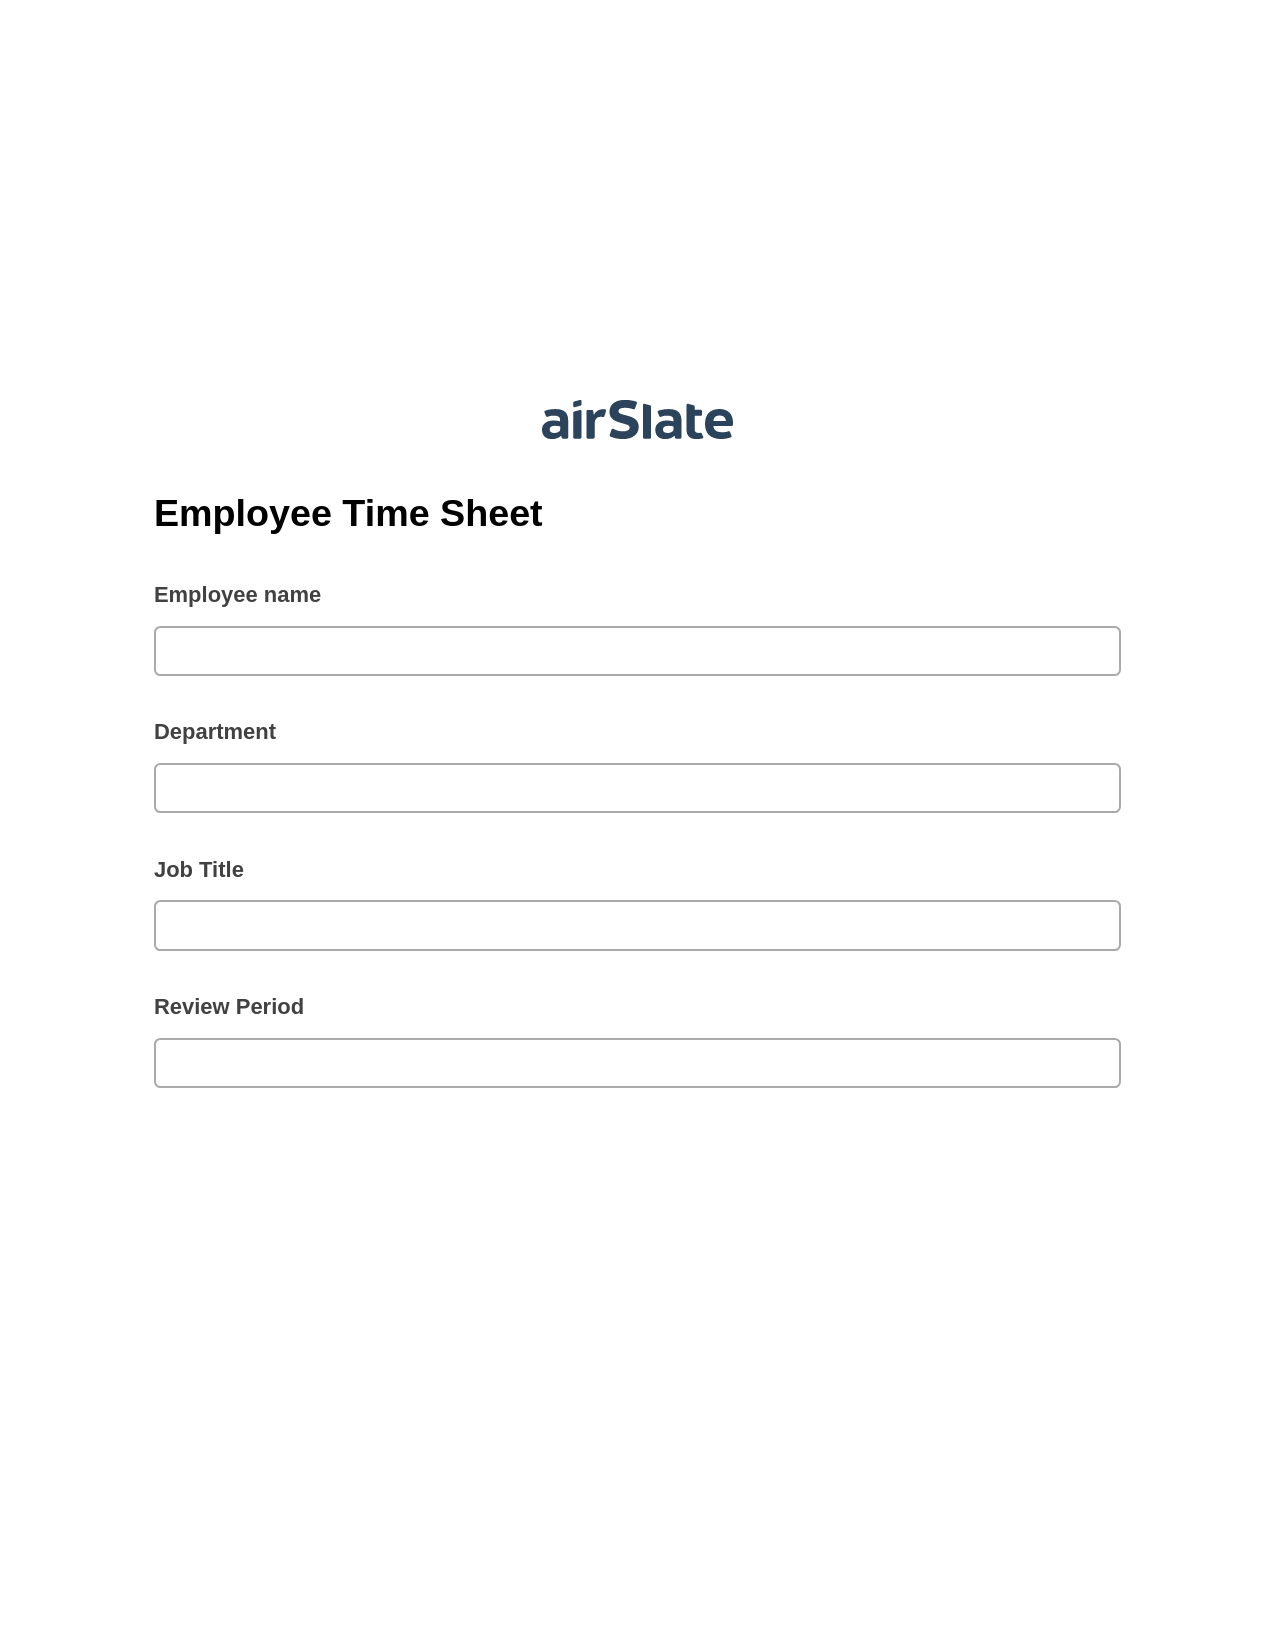 Employee Time Sheet Pre-fill Dropdowns from Airtable, Update Audit Trail Bot, Export to MySQL Bot